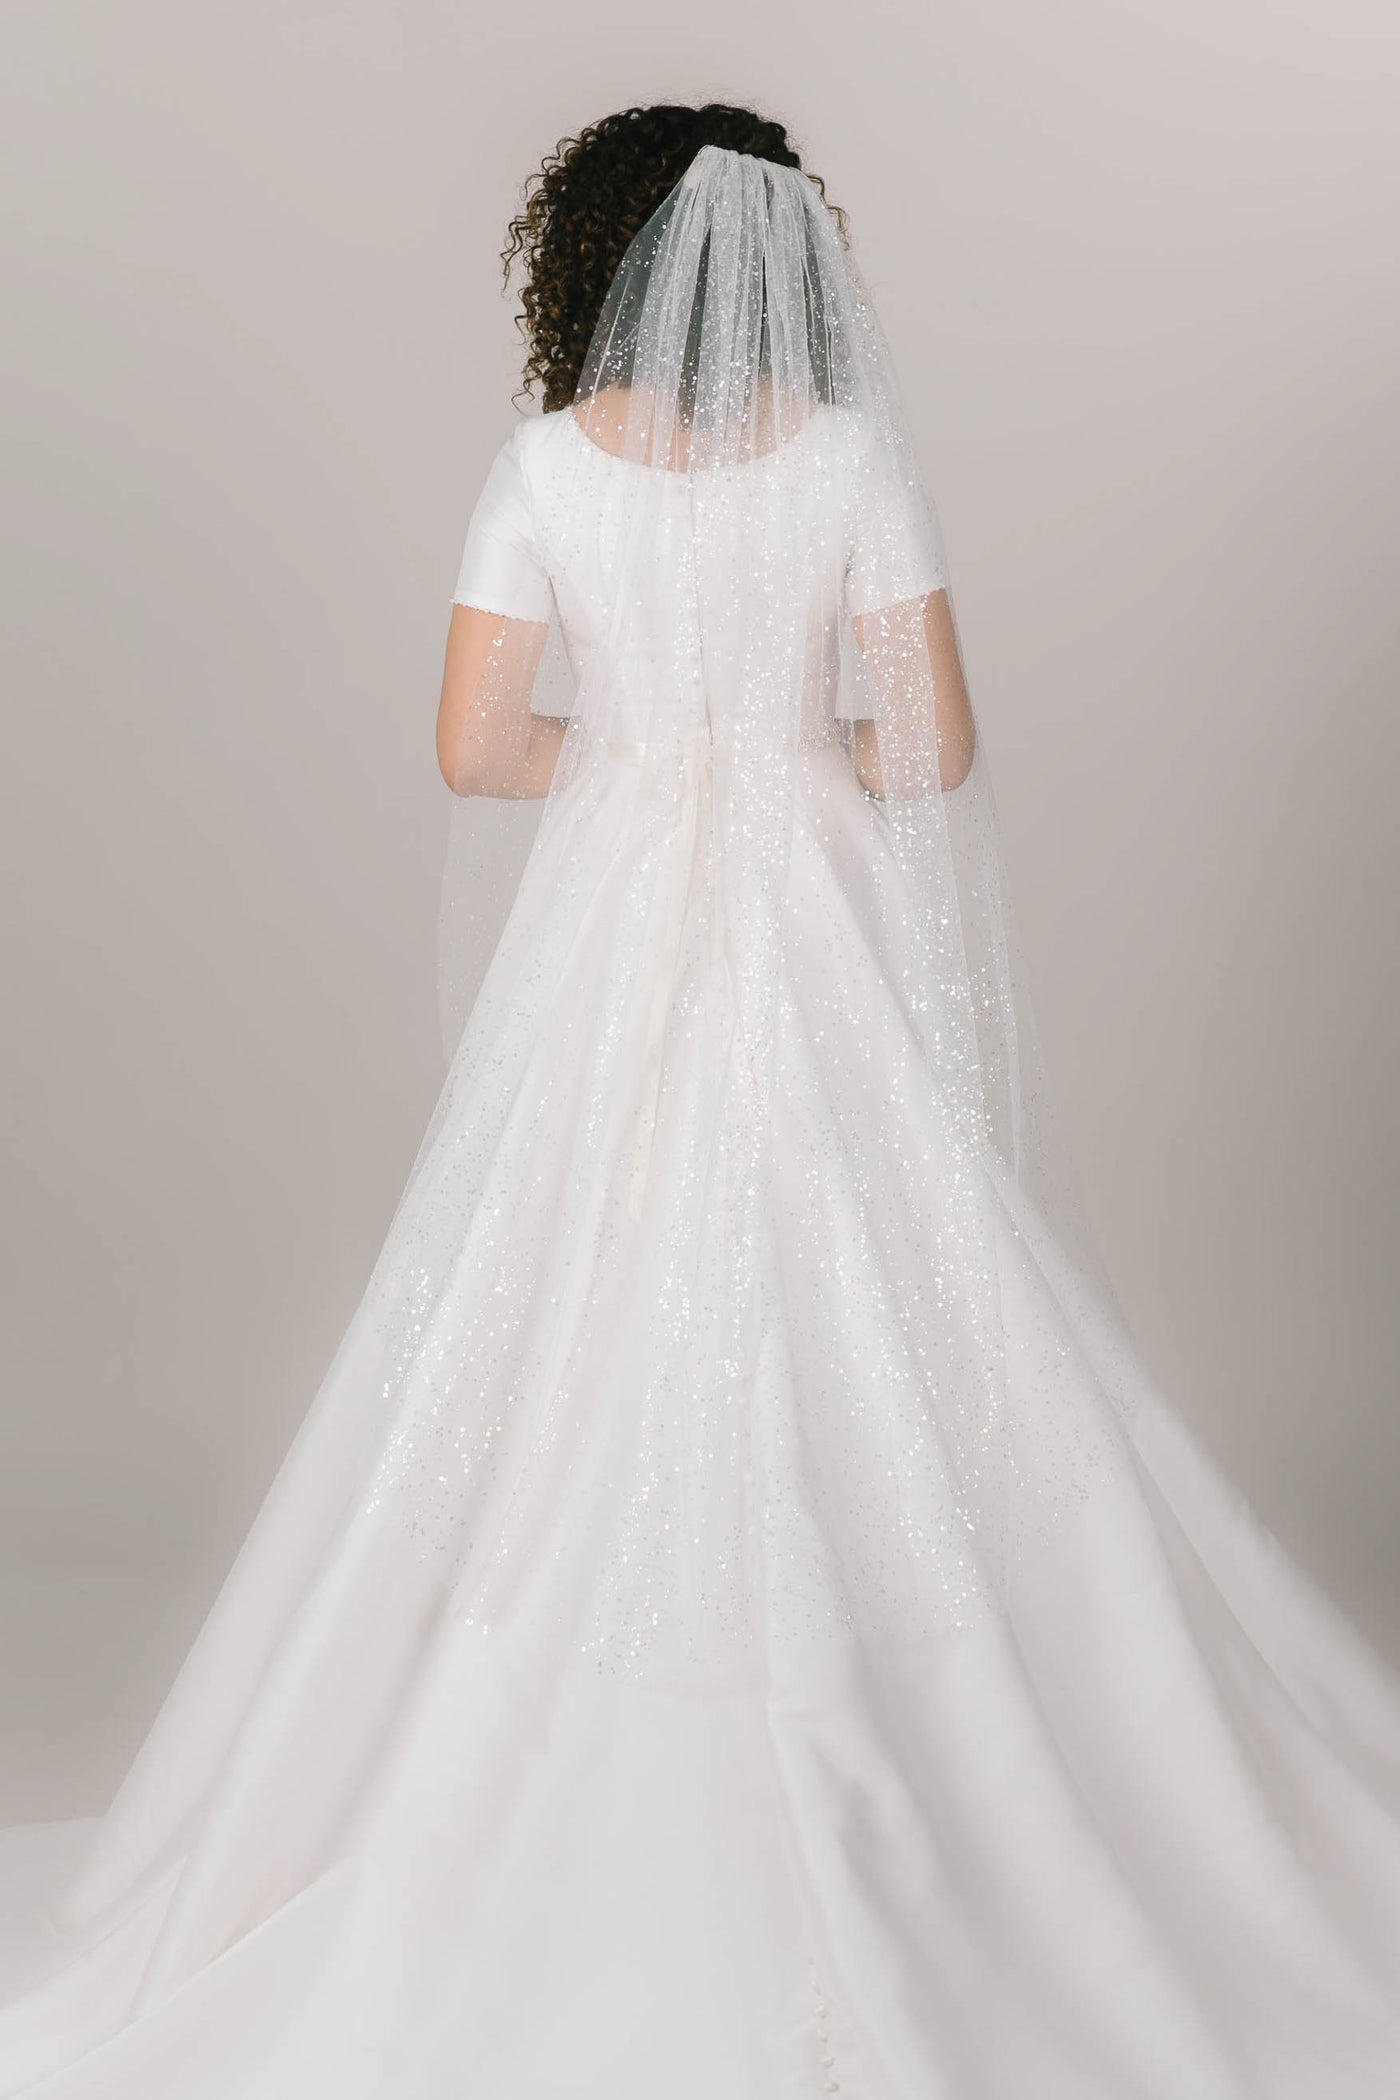 This is a bridal veil with sparkly sequins.